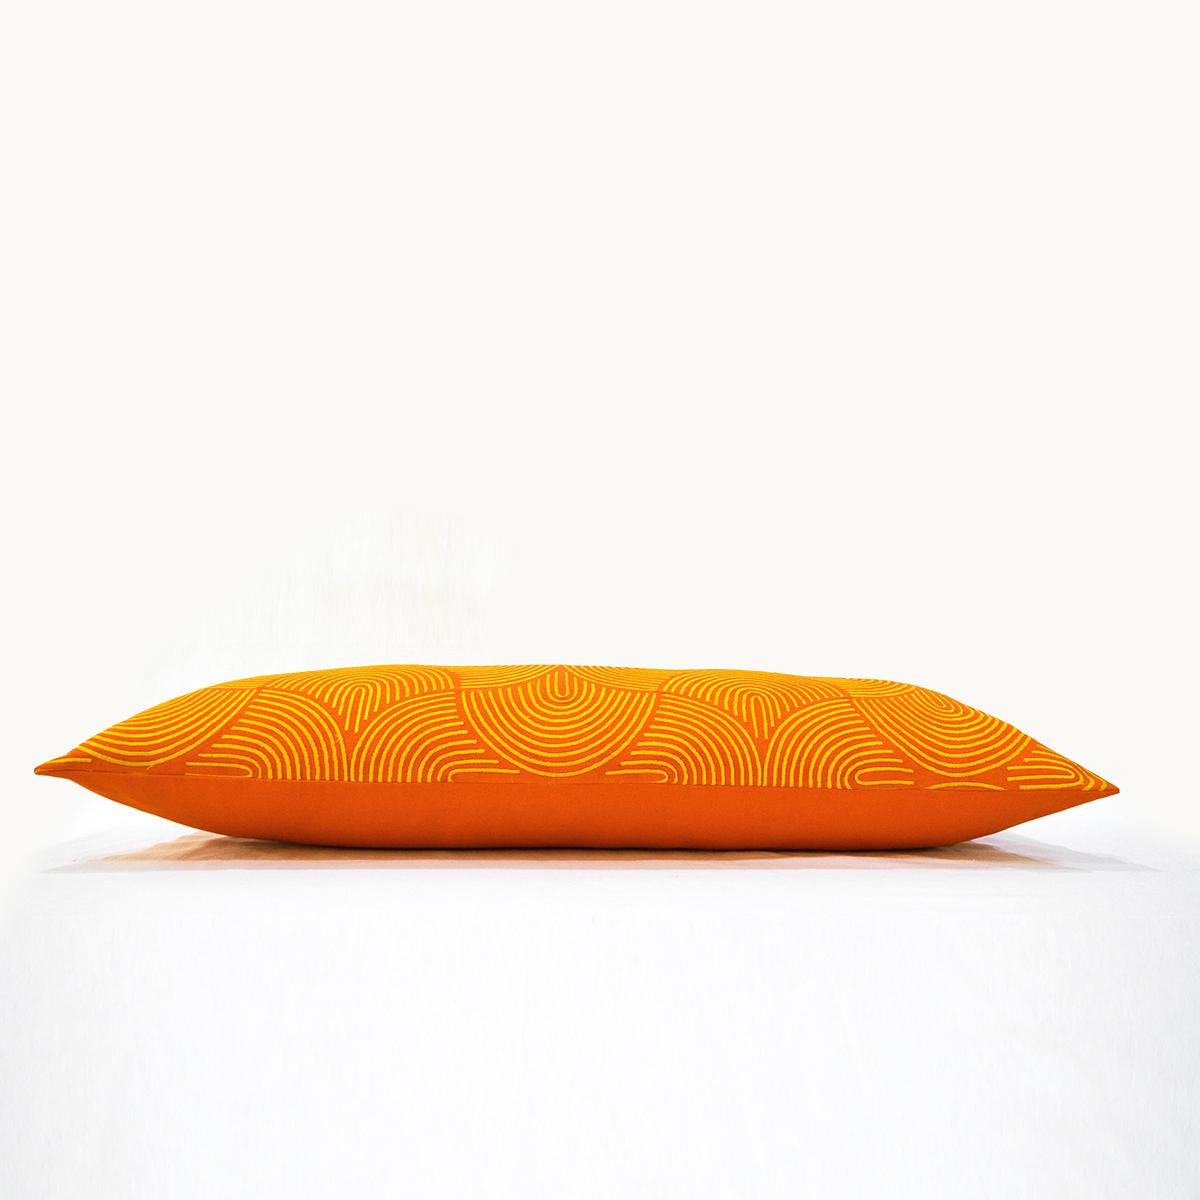 Tangerine modern retro pattern embroidered cotton pillow cover, long lumbar pillow cover & other sizes available